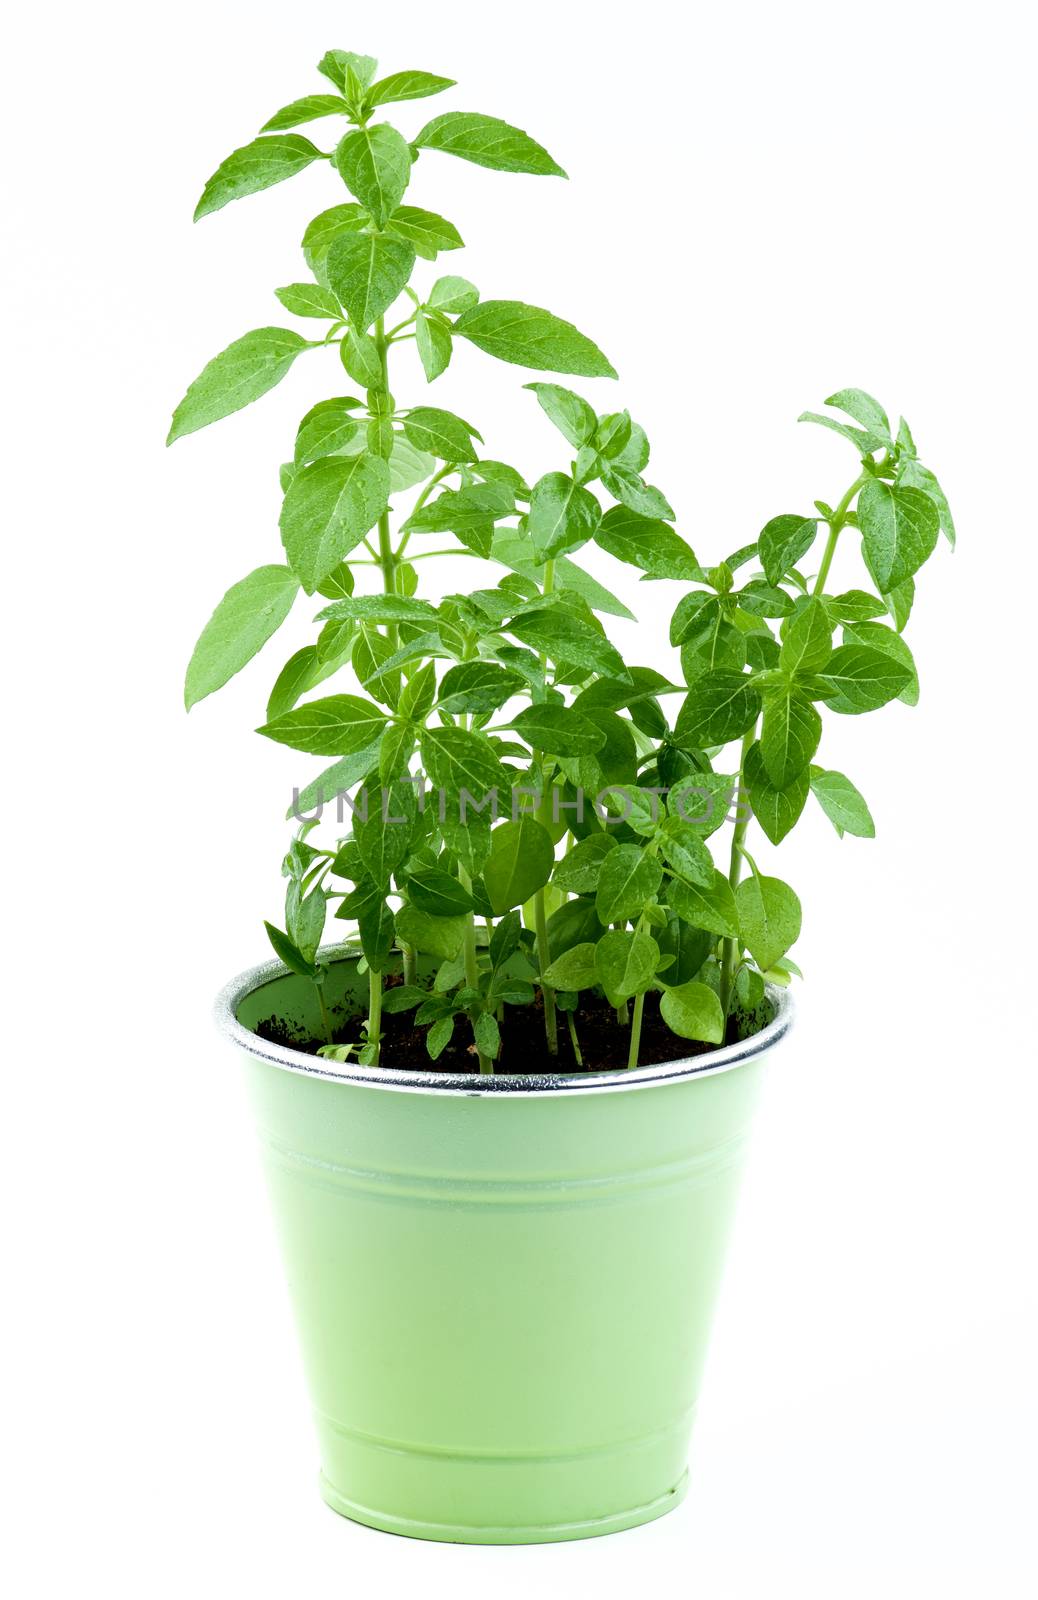 Fresh Green Lush Foliage Mediterranean Basil with Water Drops in Green Flower Pot isolated on White background